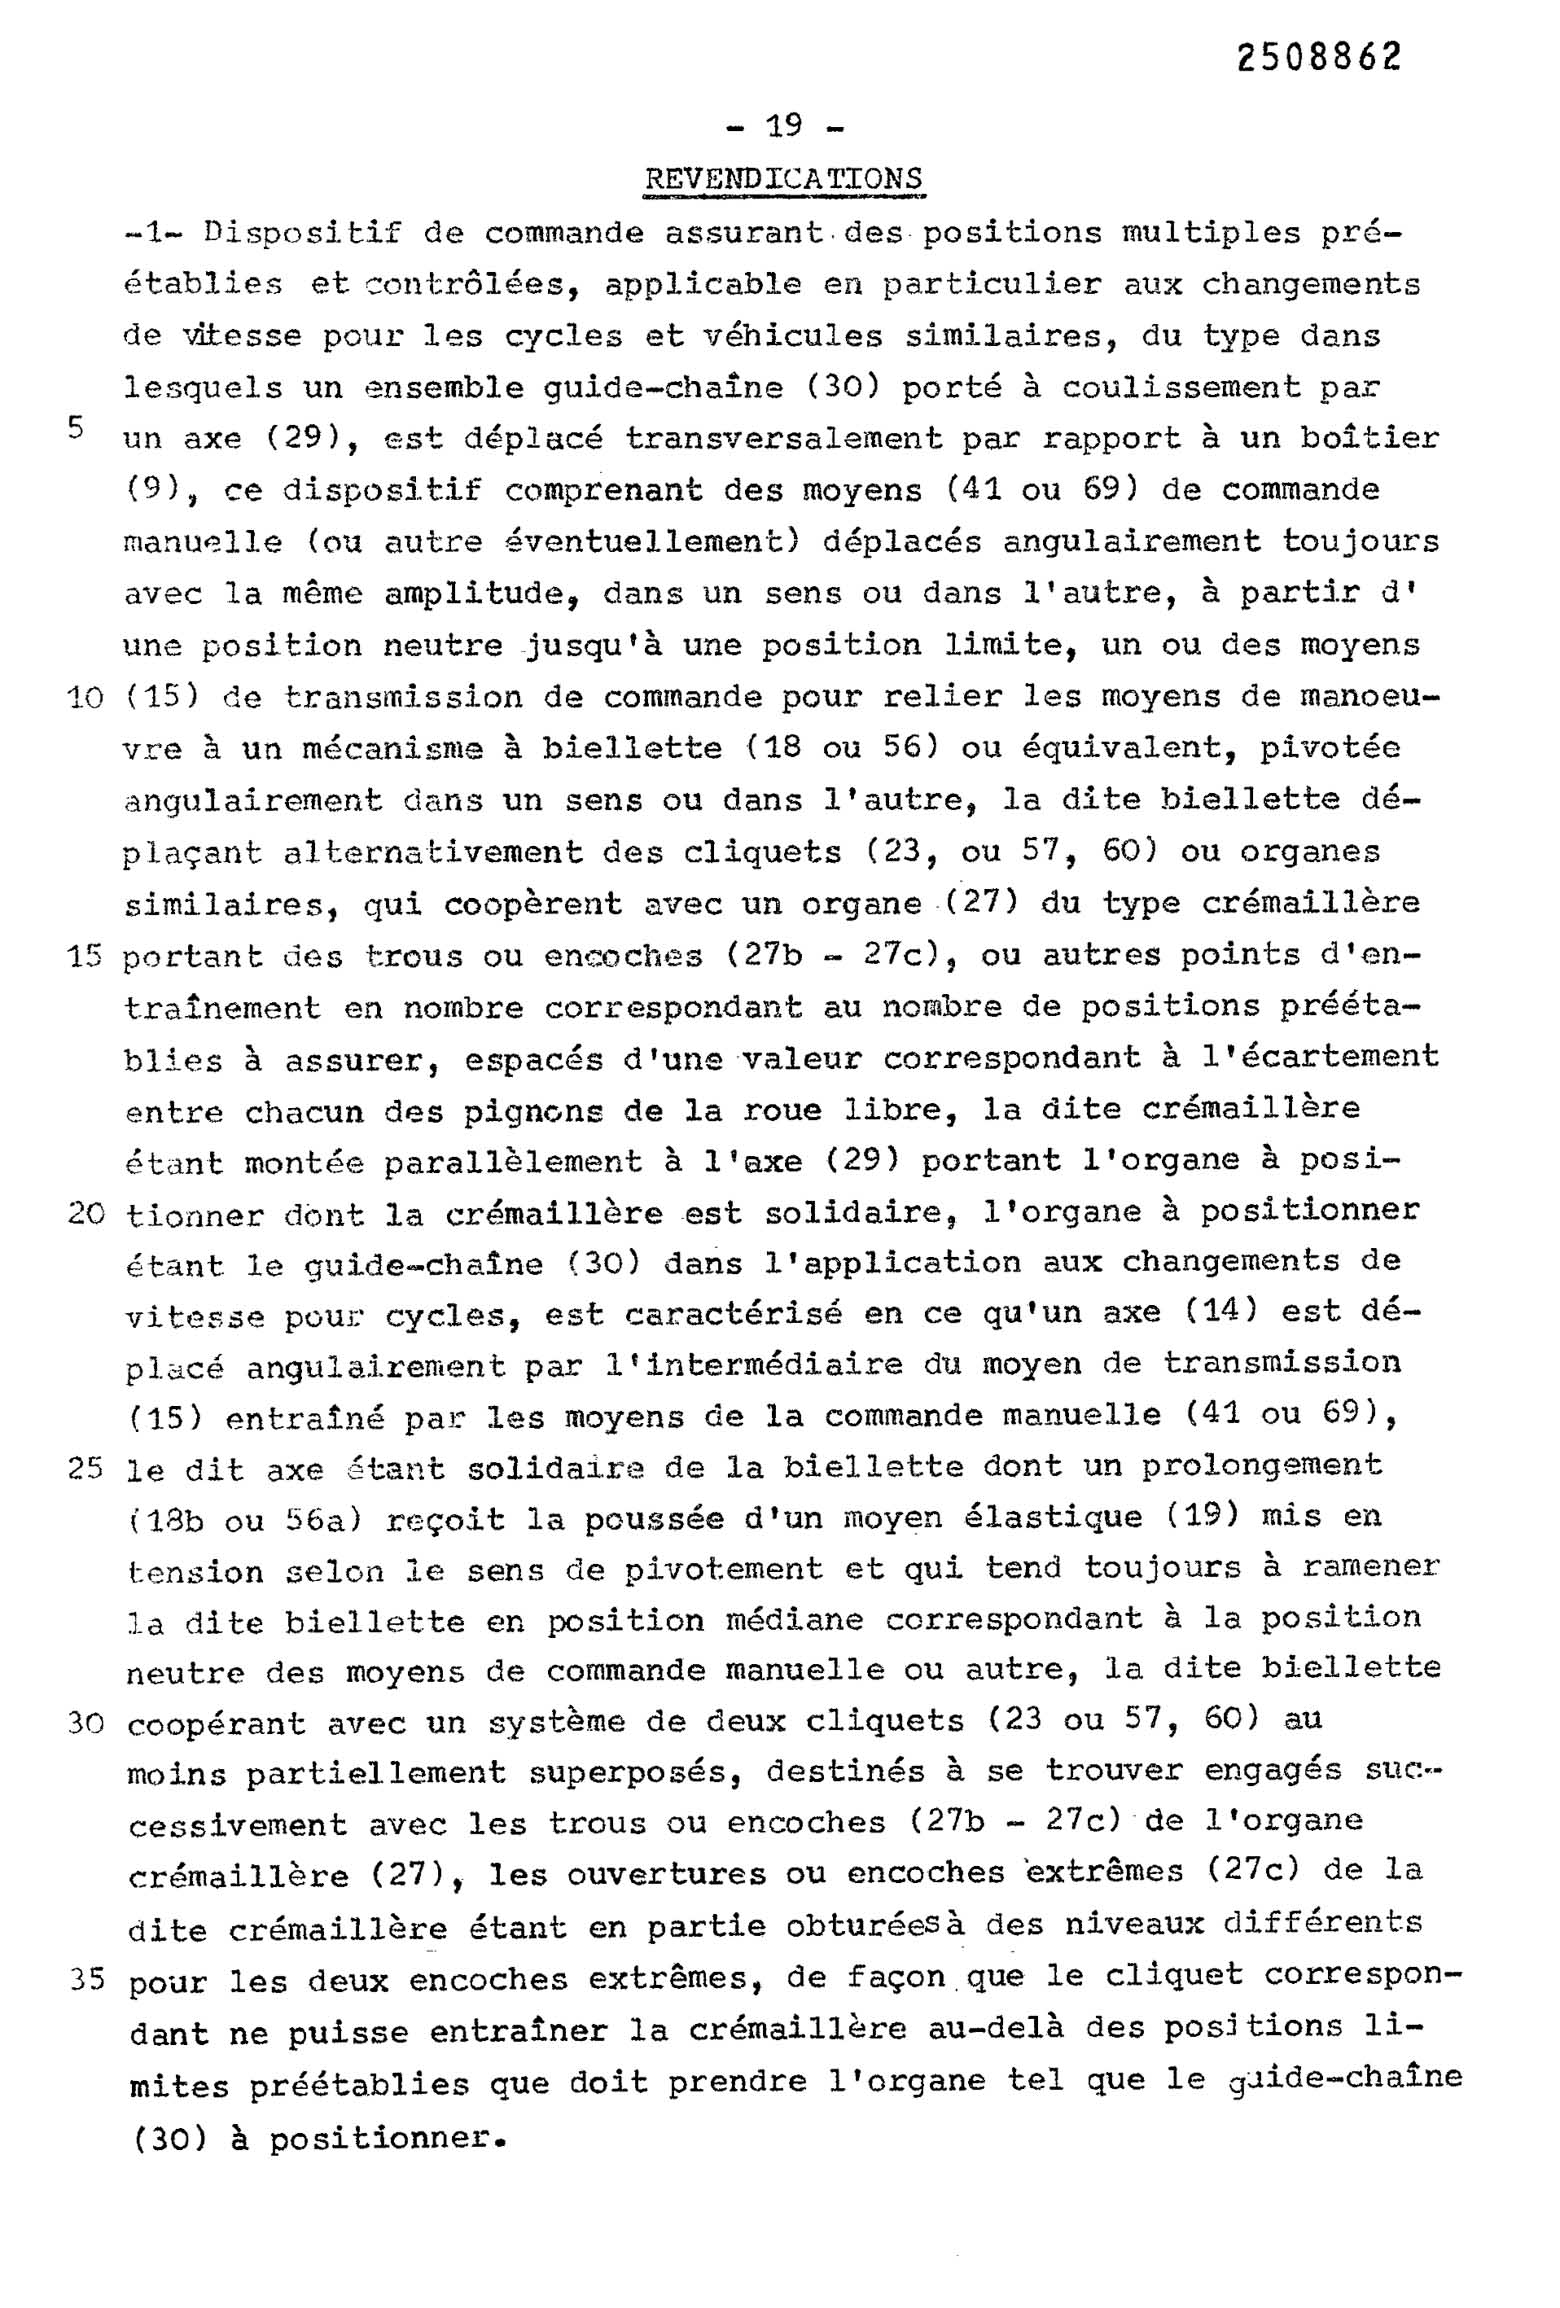 French Patent 2,508,862 - Simplex scan 020 main image